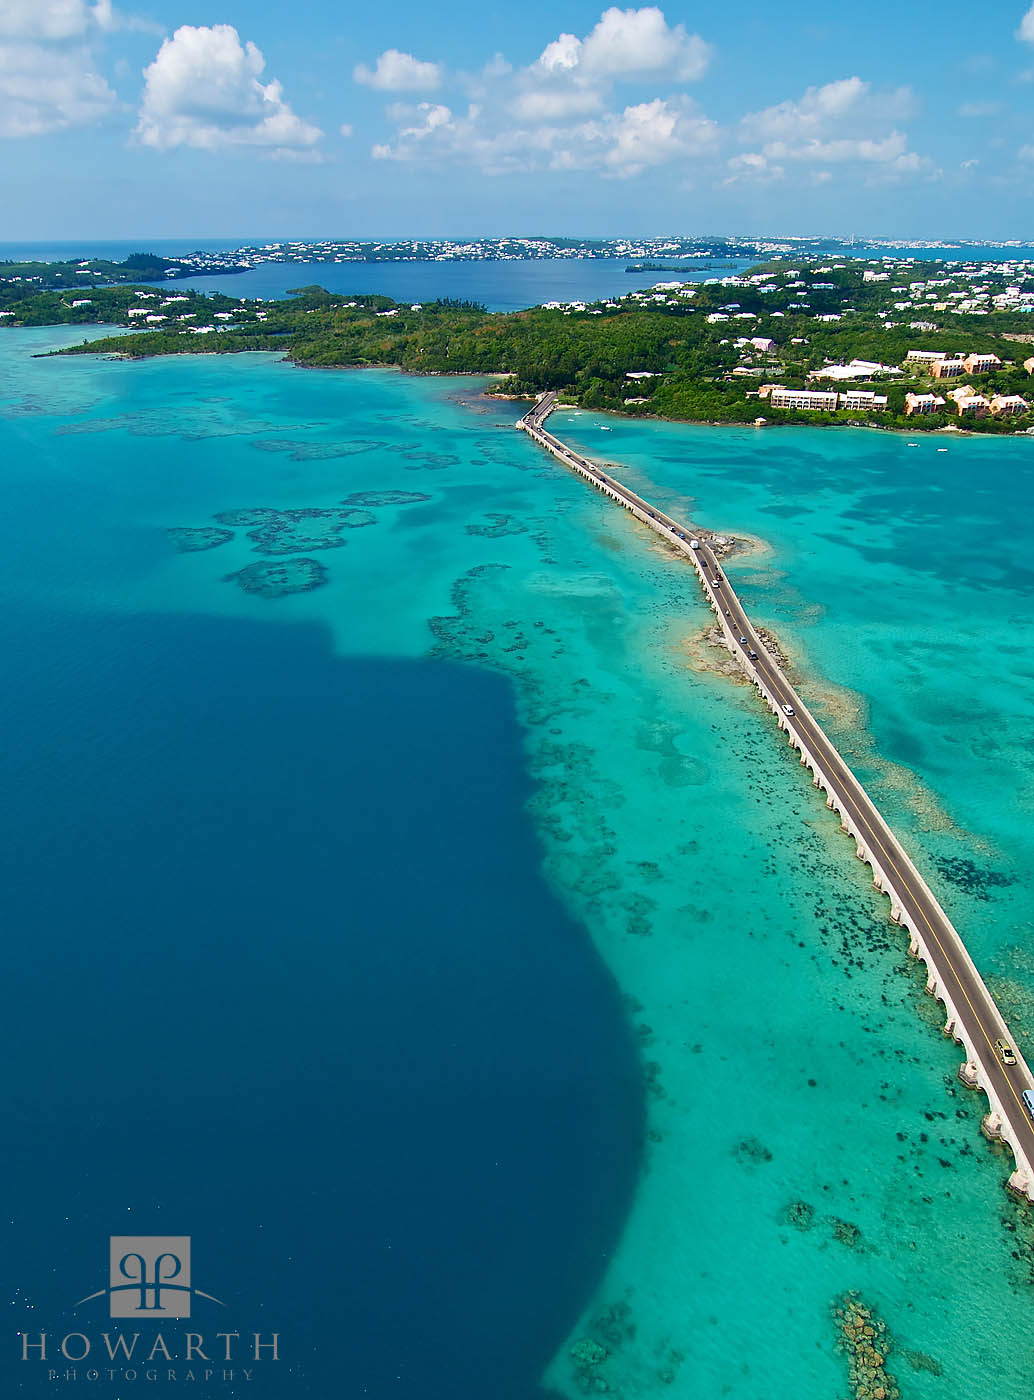 The Causeway connecting St. George's to Grotto Bay